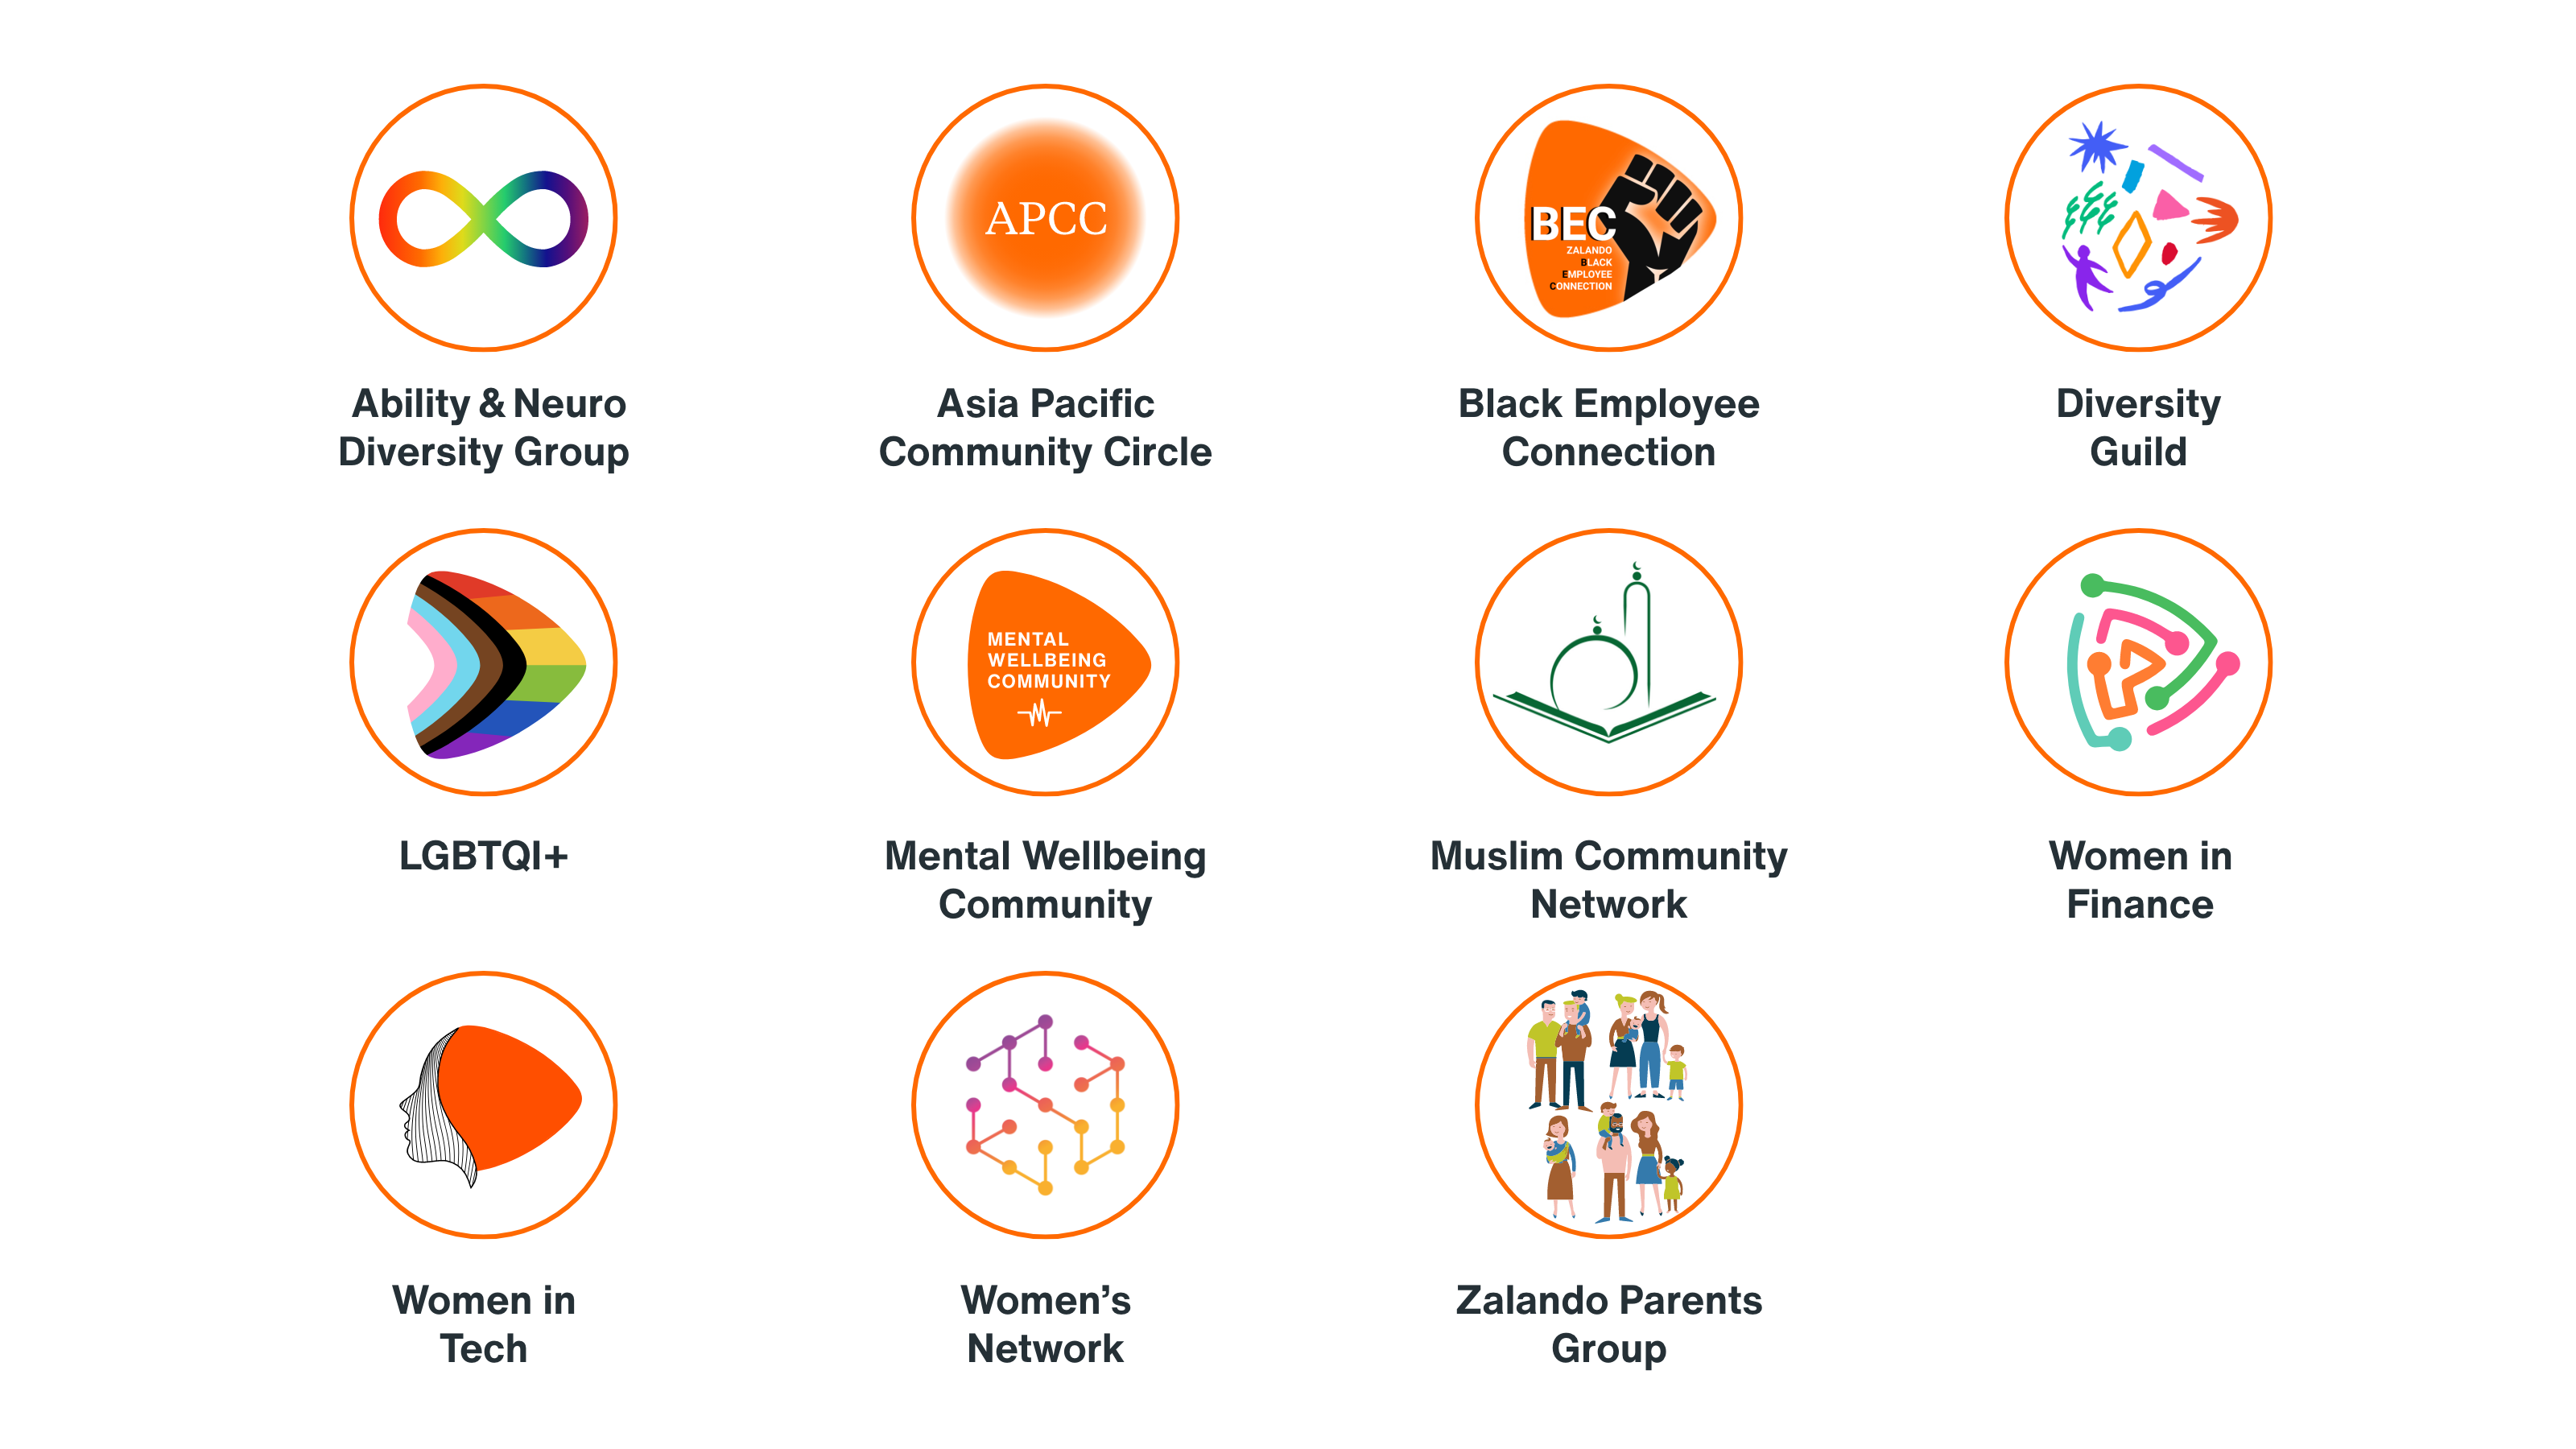 Eleven different symbols of the employee resources groups and their names: Ability & Neuro Diversity Group, Asia Pacific Community Circle, Black Employee Connection, Diversity Guild, LGBTQI+, Mental Wellbeing Community, Muslim Community Network, Women in Finance, Women in Tech, Women's Network and Zalando Parents Group.